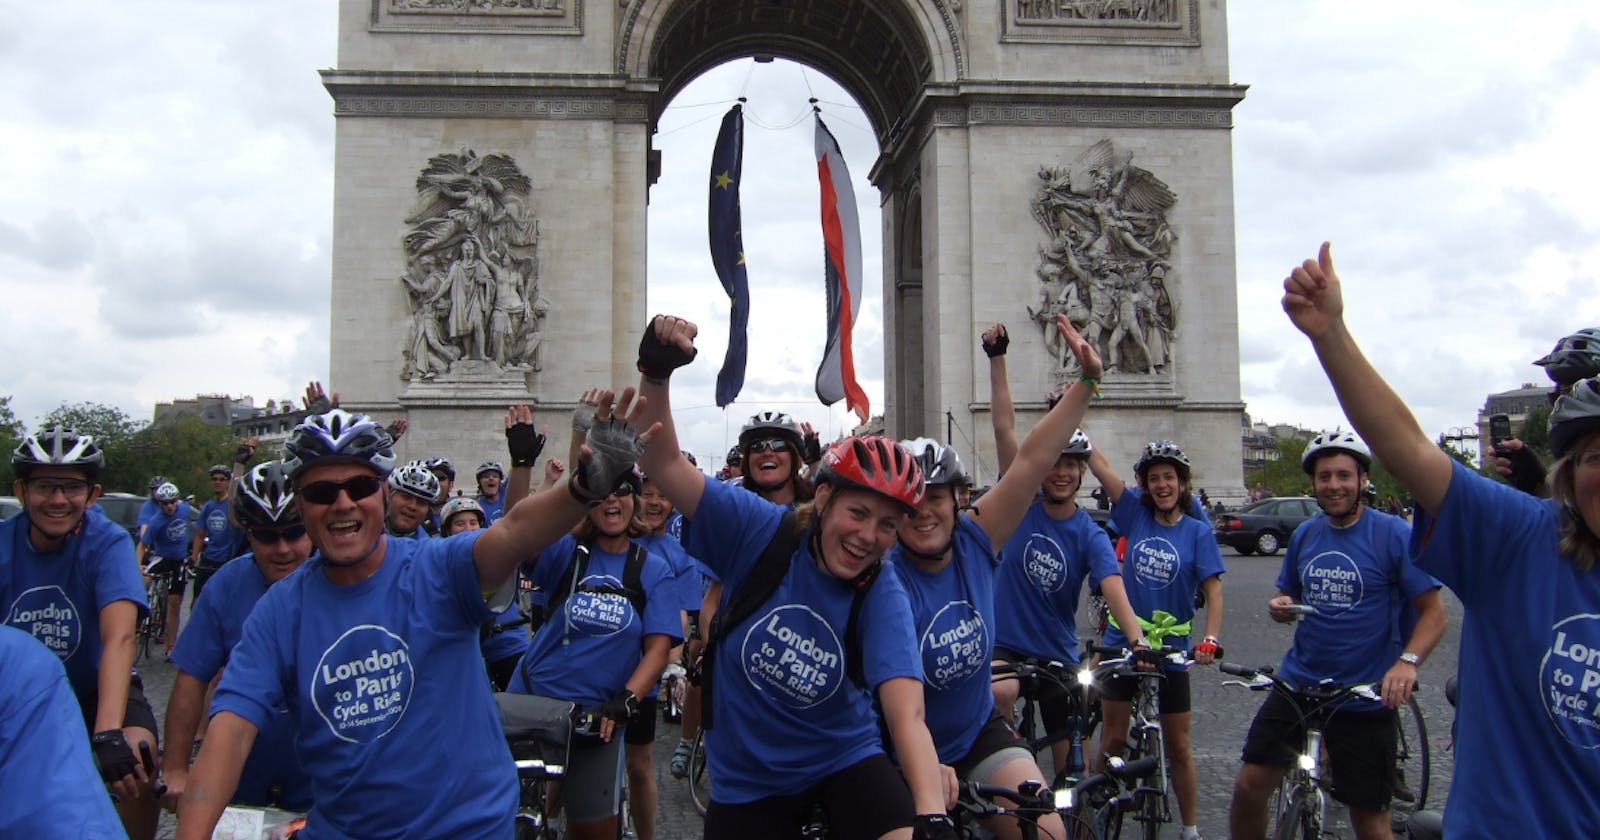 From London to Brighton and Beyond: Embracing the Spirit of Giving in Charity Bike Rides